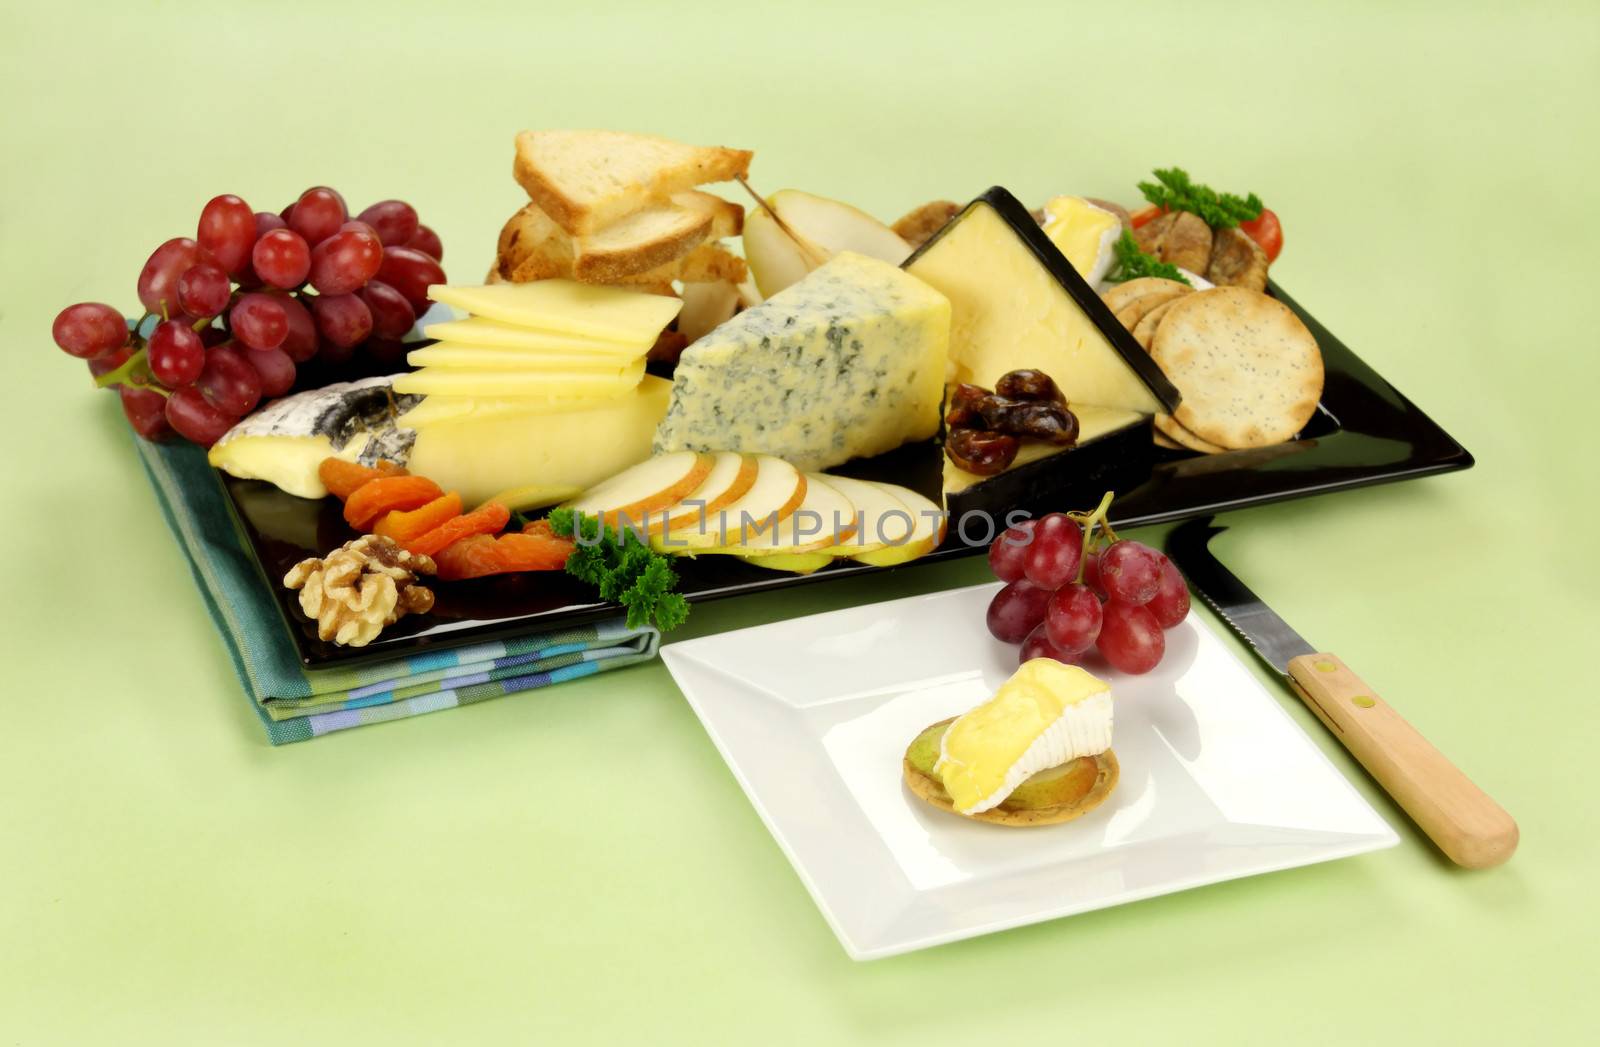 Delicious cheese platter with various cheeses and fruits ready to serve.